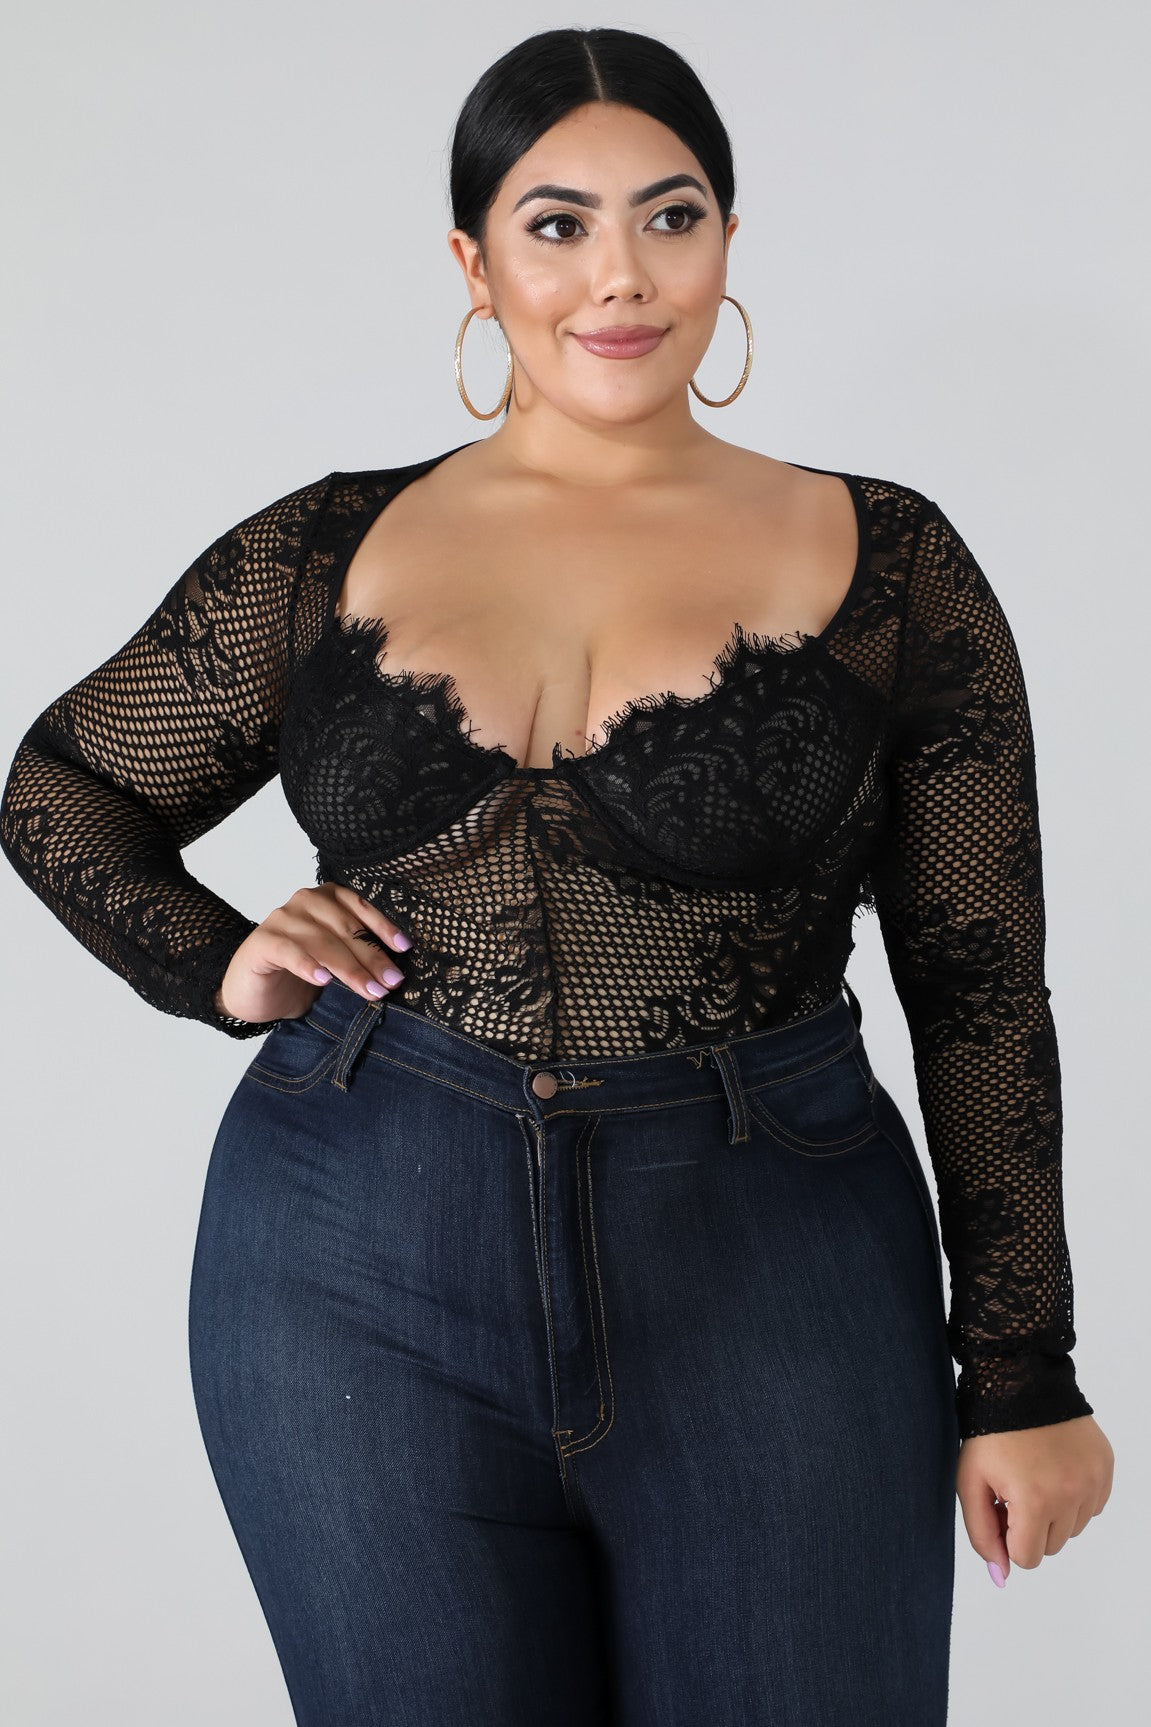 DAY DREAMING LACE BODYSUIT - Feelin' Myself Boutique